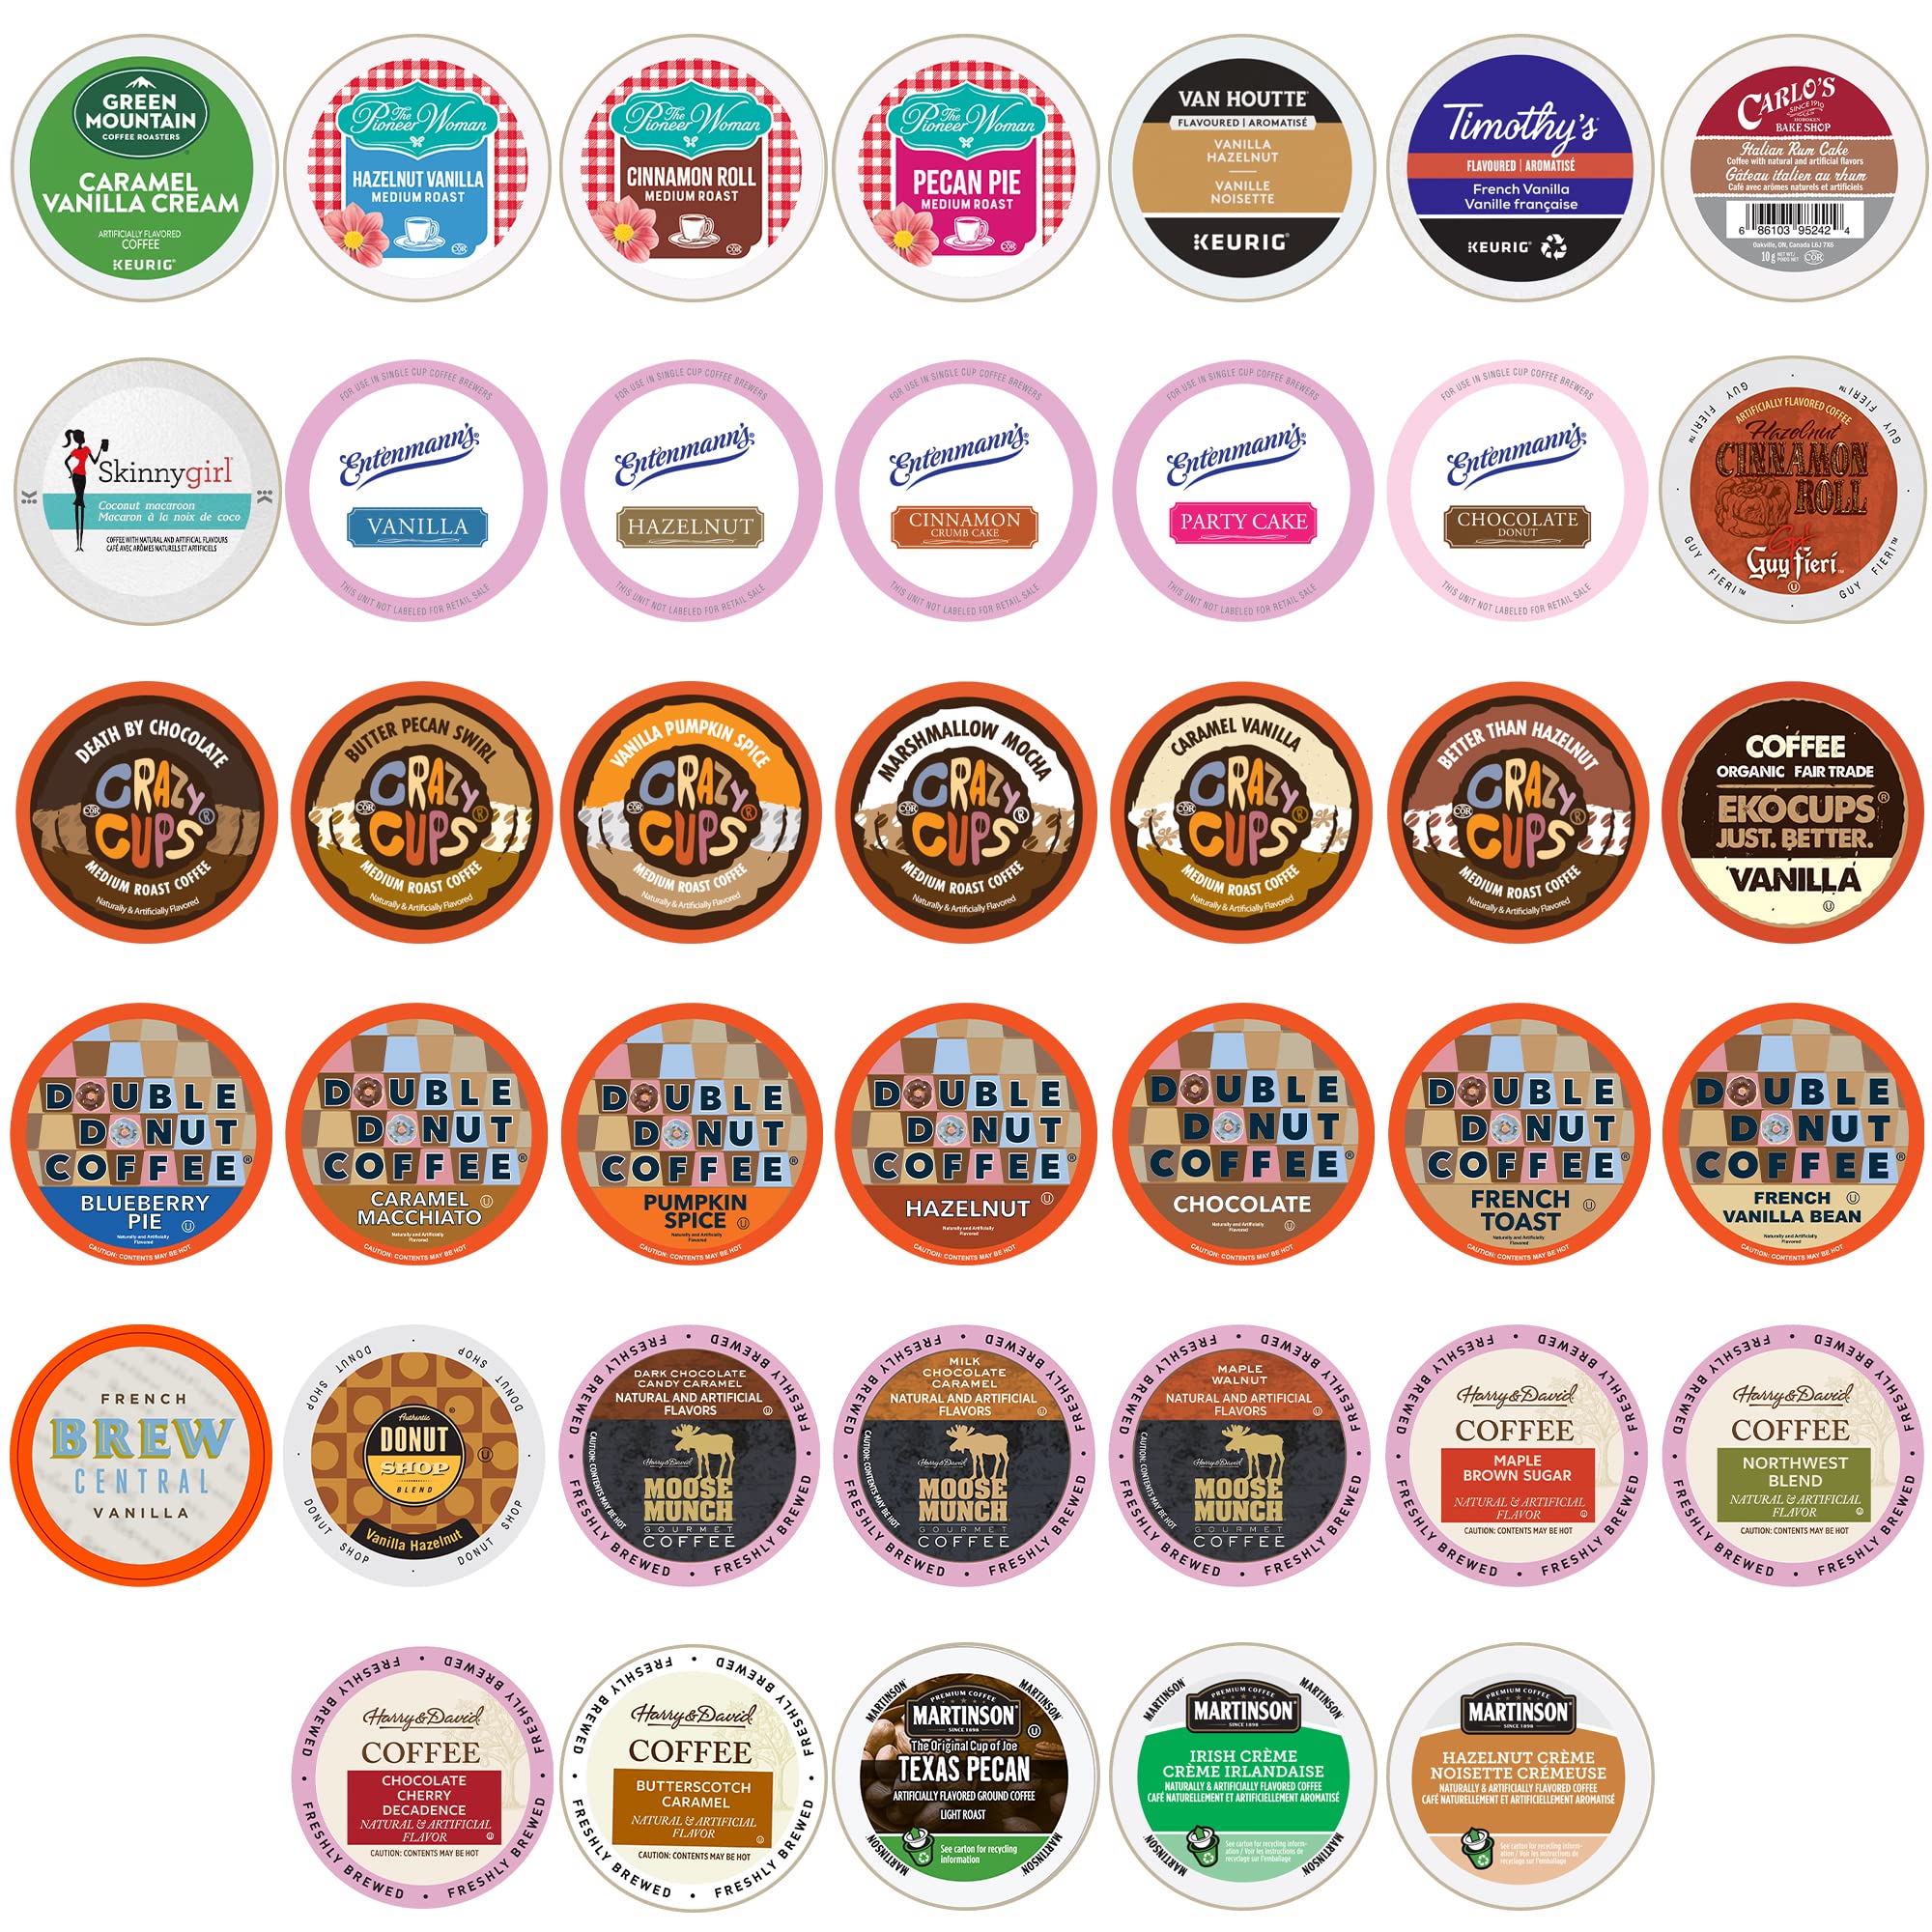 Book Cover Crazy Cups Pod Variety Pack - Unique Flavors of Chocolate, Vanilla, Caramel, Coffee Capsules, Flavored Coffee, 40 Count Flavored Coffee 40 Count (Pack of 1)